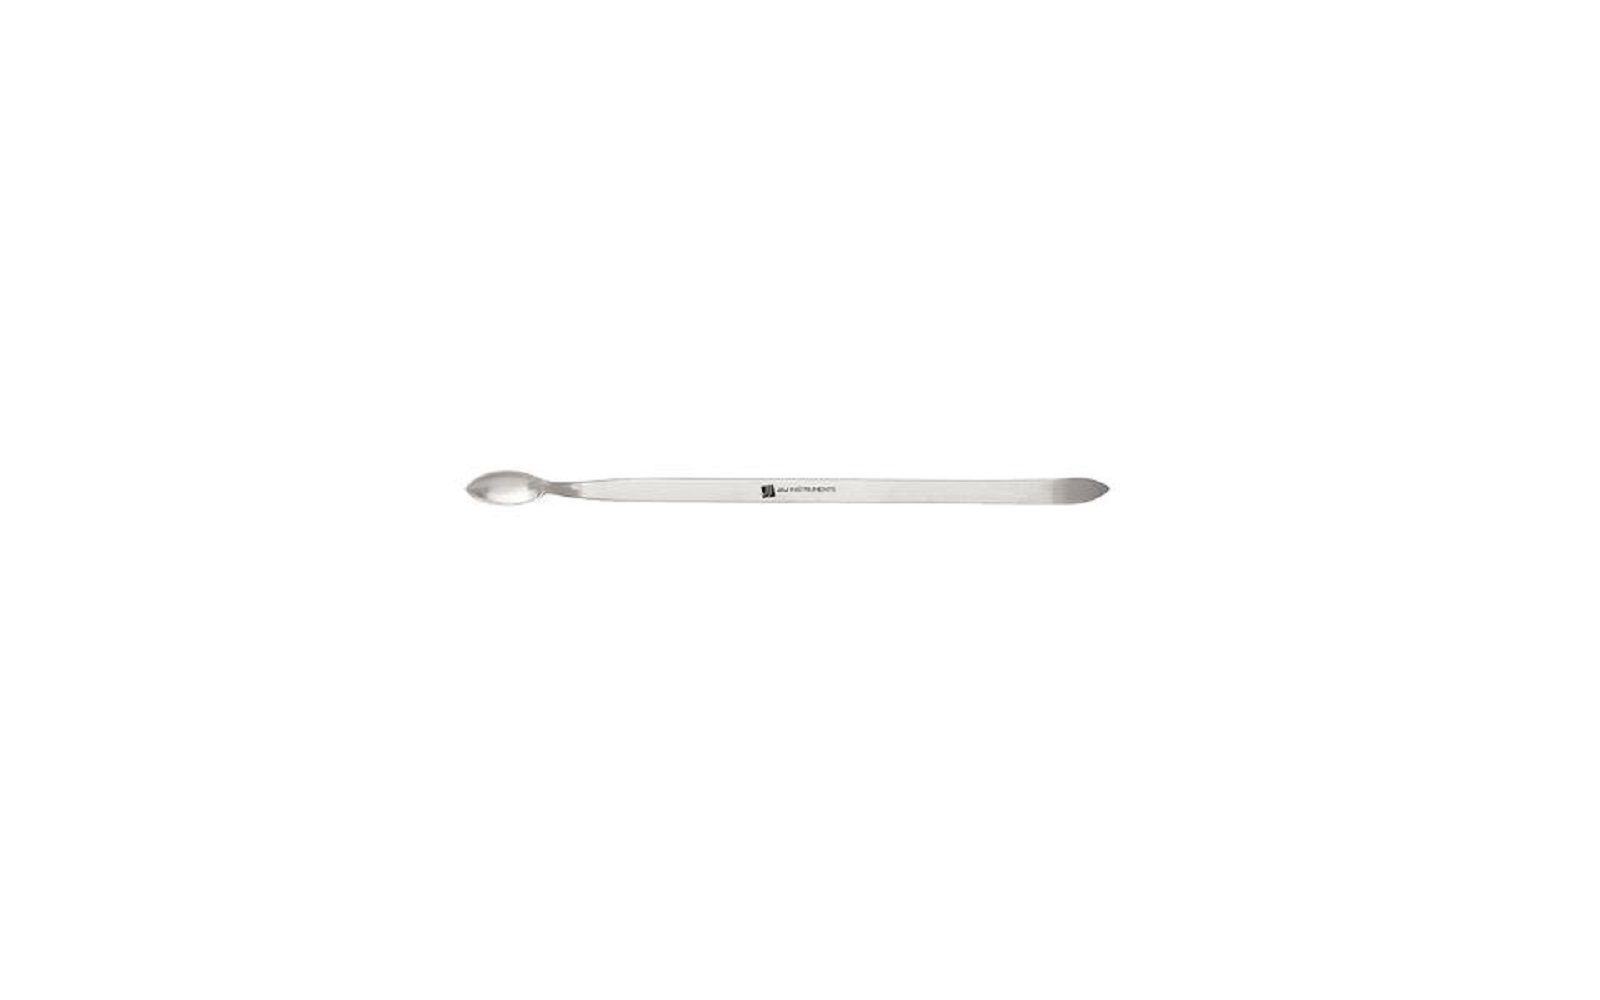 Wax spatula – 5, double ended